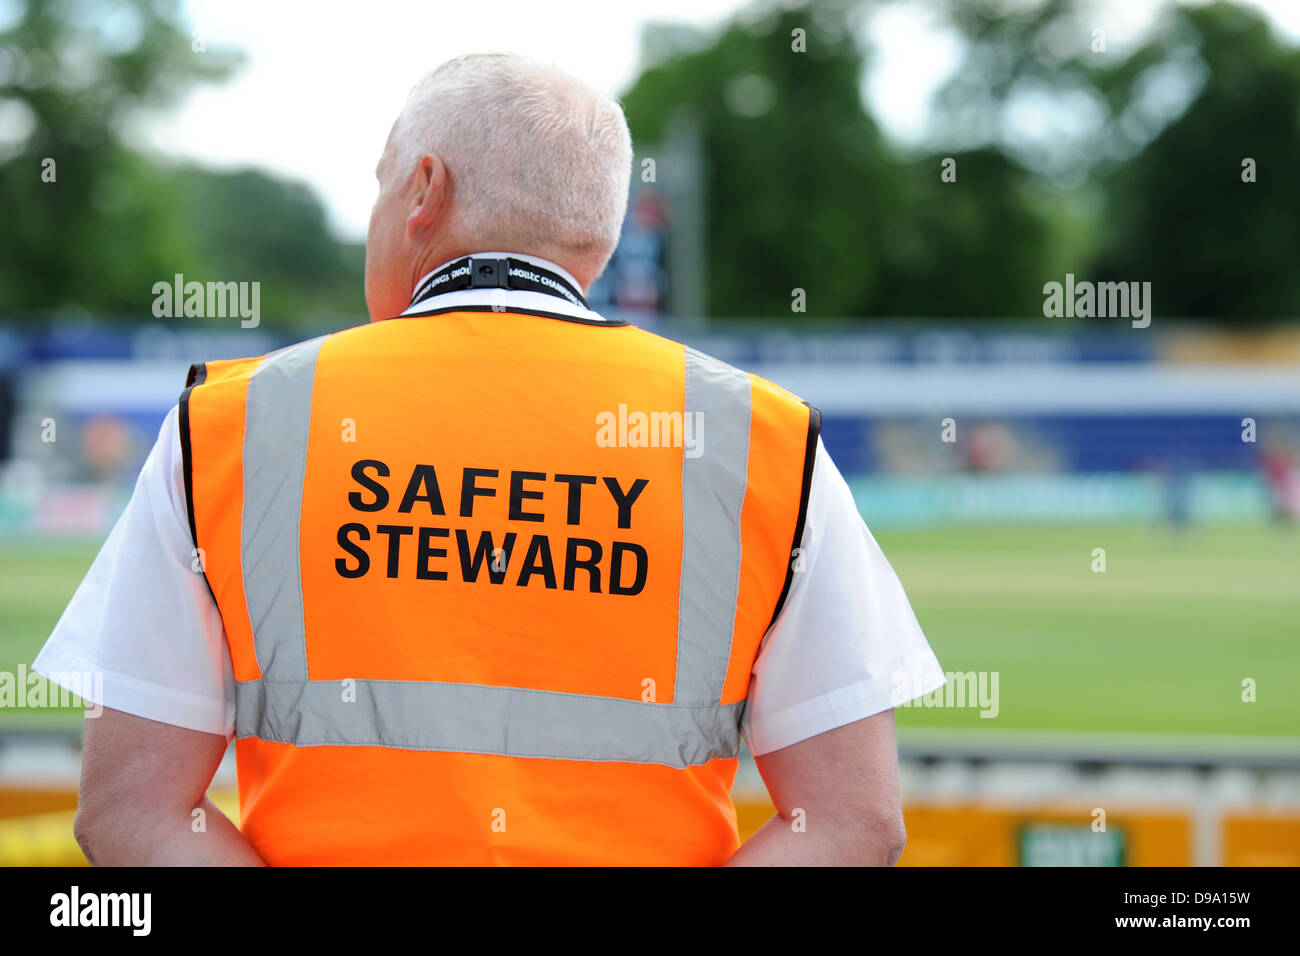 A safety steward seen from behind. Stock Photo